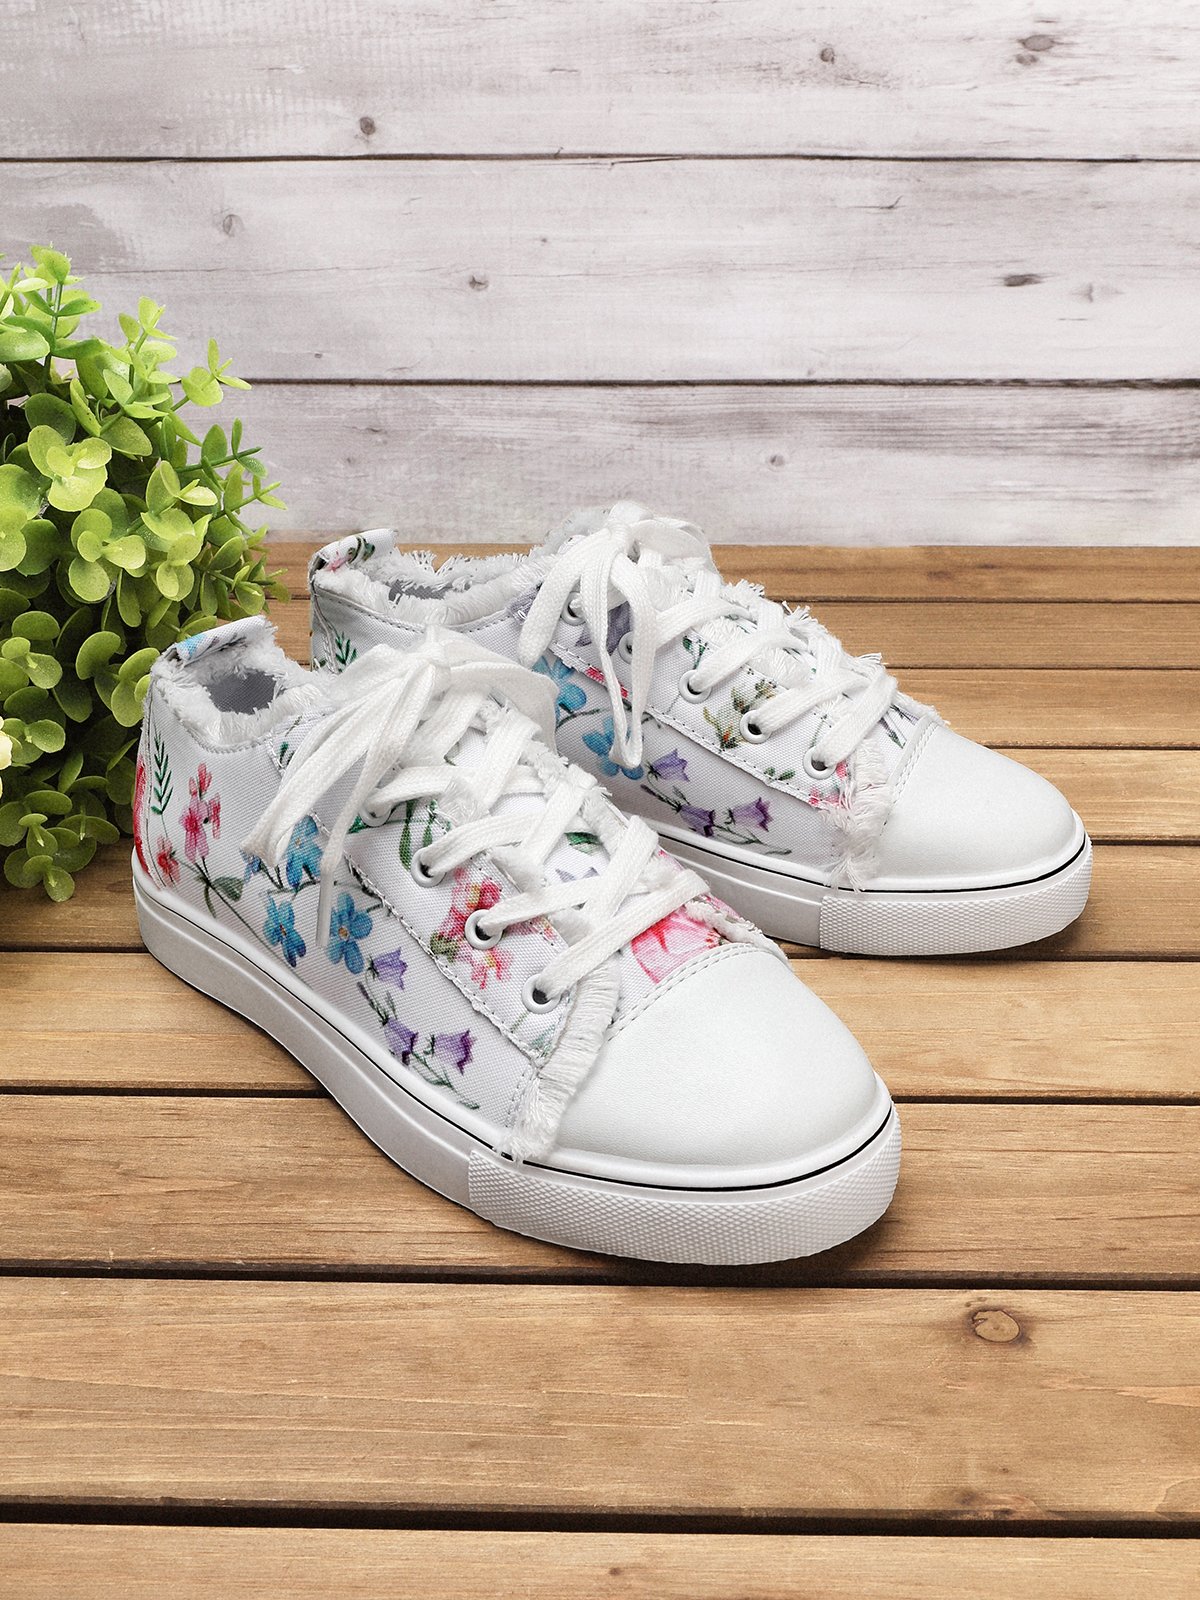 Fashion Floral Ultralight Breathable Sports Canvas Shoes